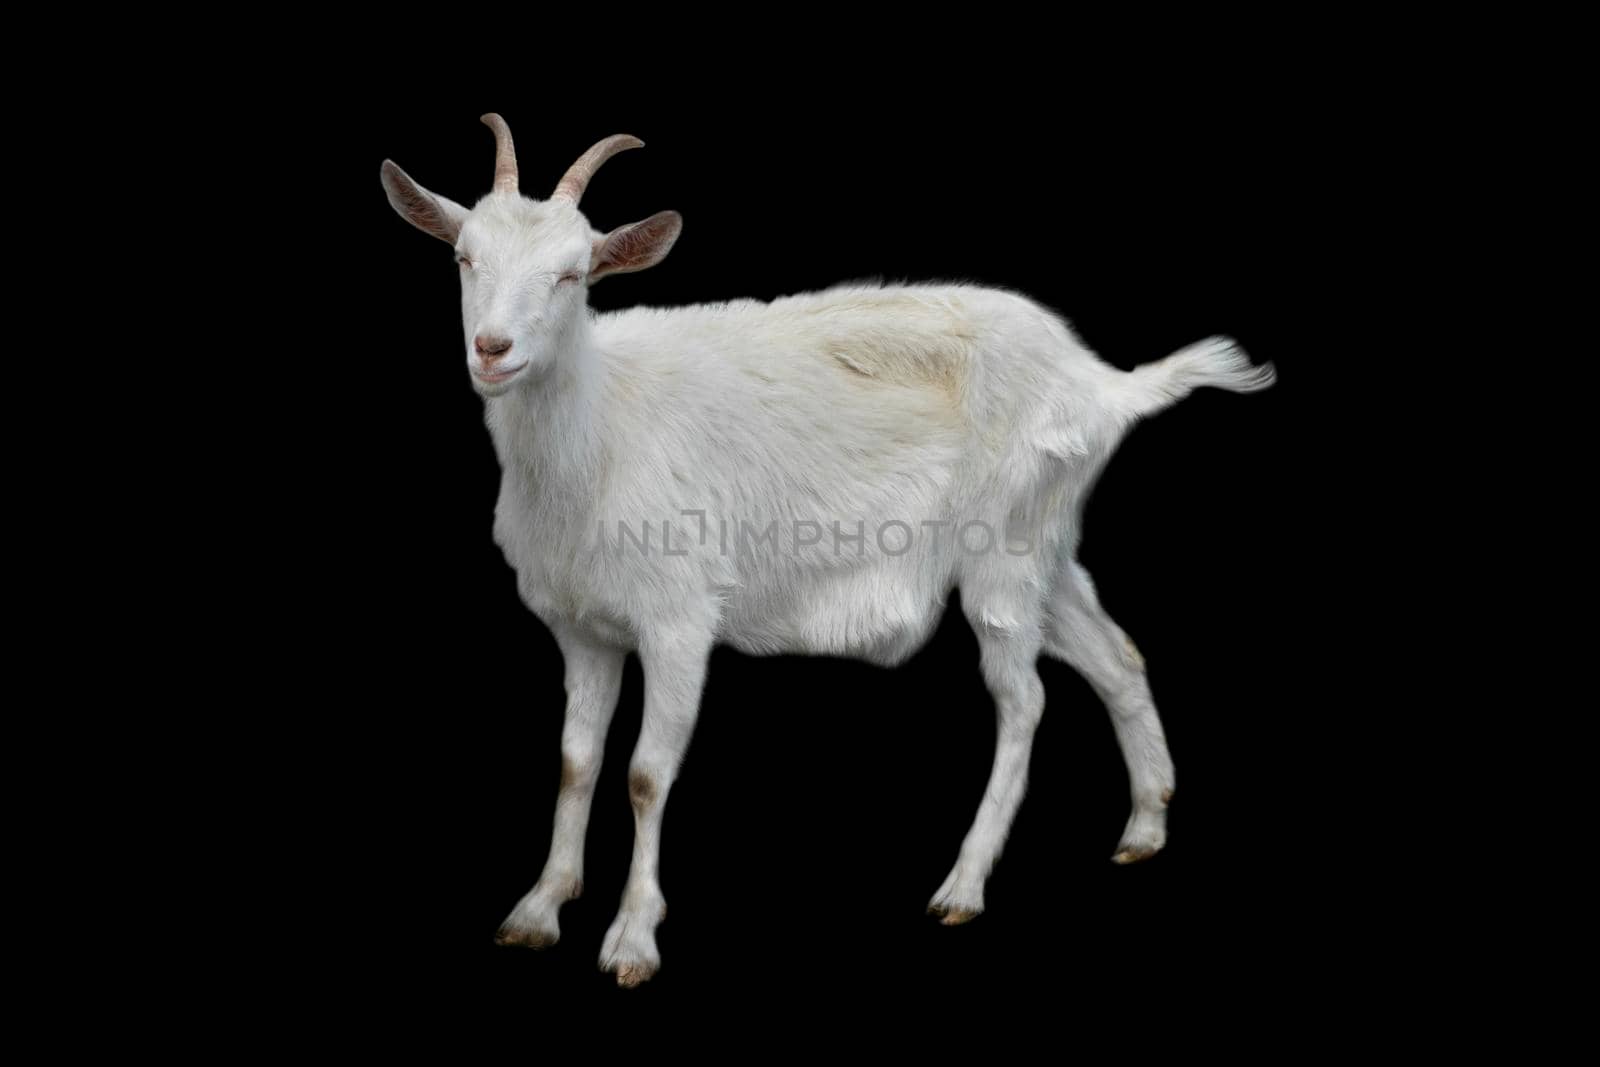 Funny white female Goat isolated on black background. Goat with long horns walking full length cut out. Farm animals.